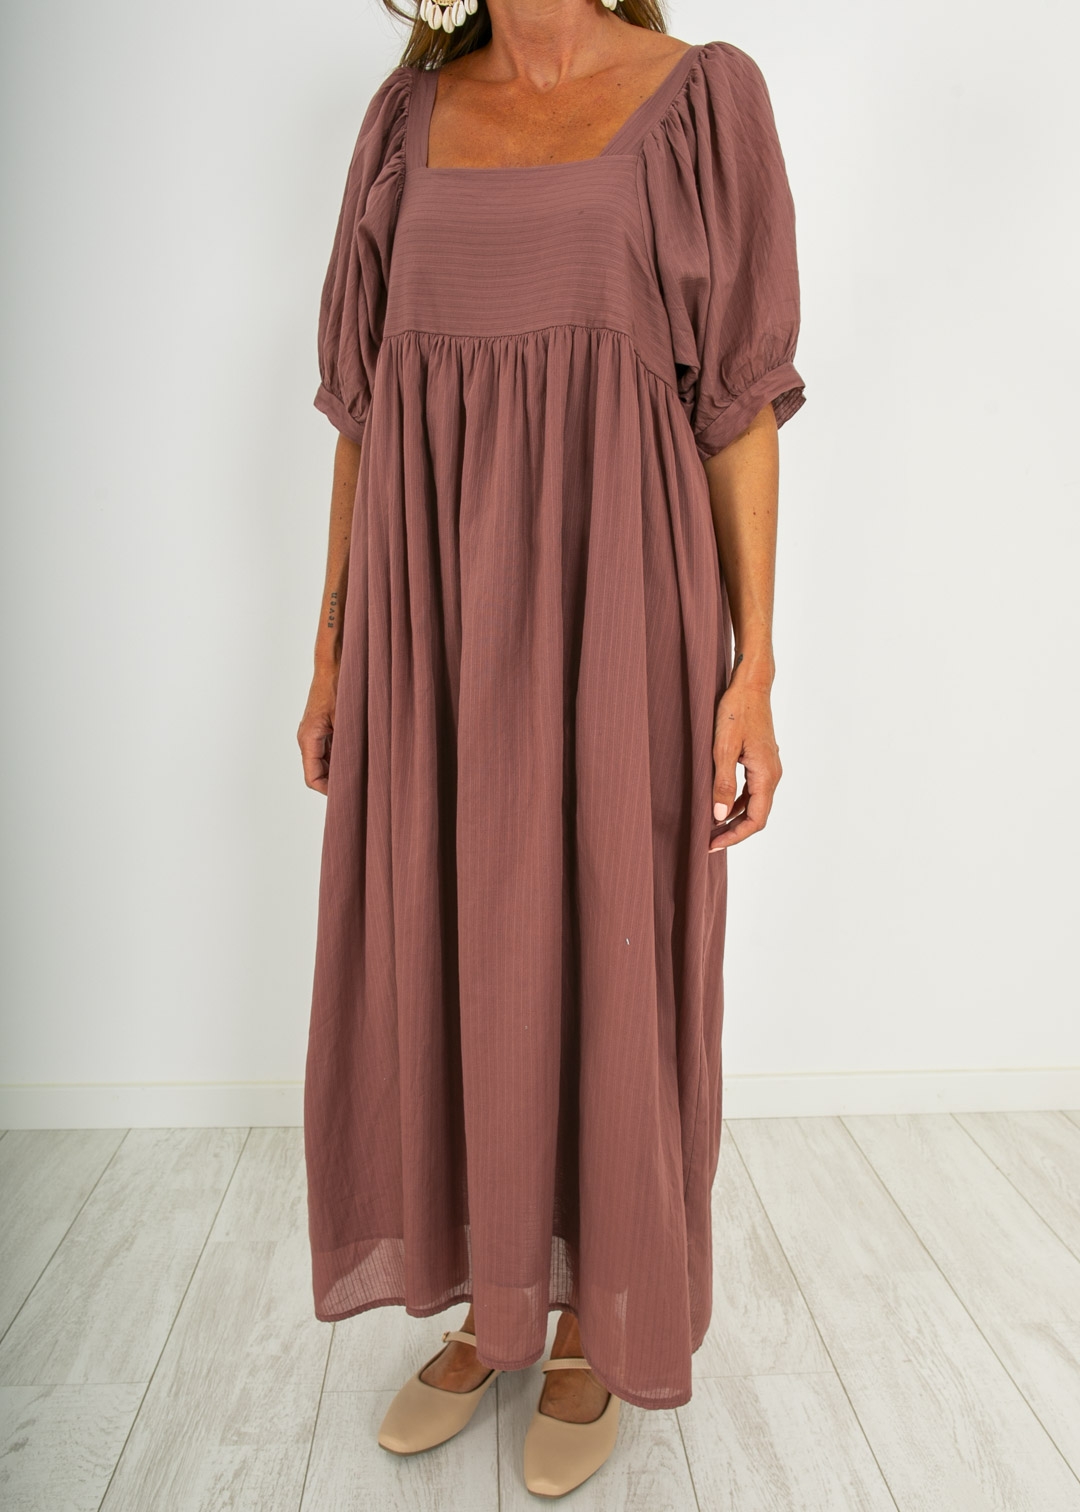 LONG DRESS WITH SHORT PUFFED SLEEVES IN TILE